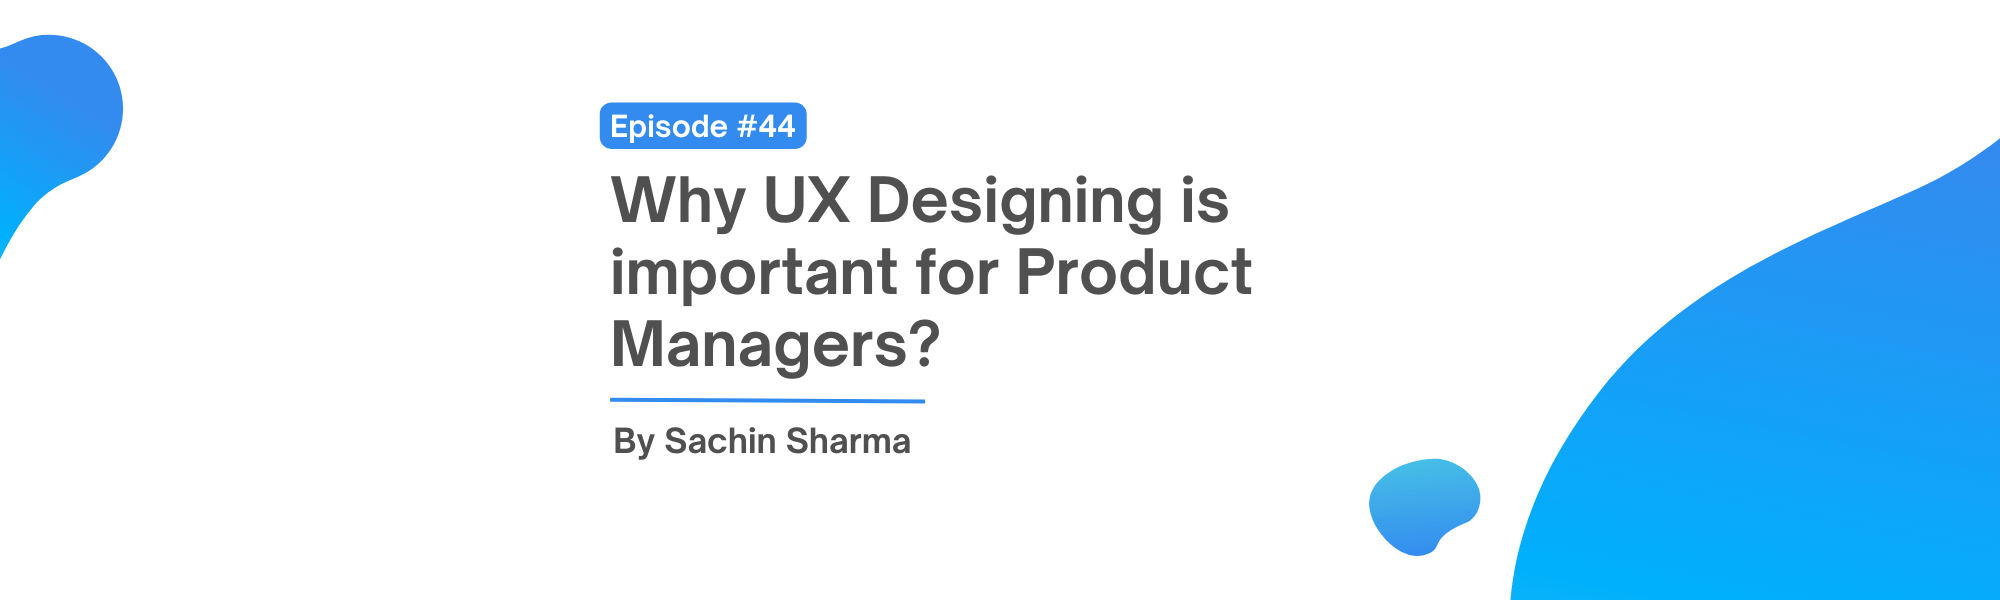 Why UX Designing is important for Product Managers?